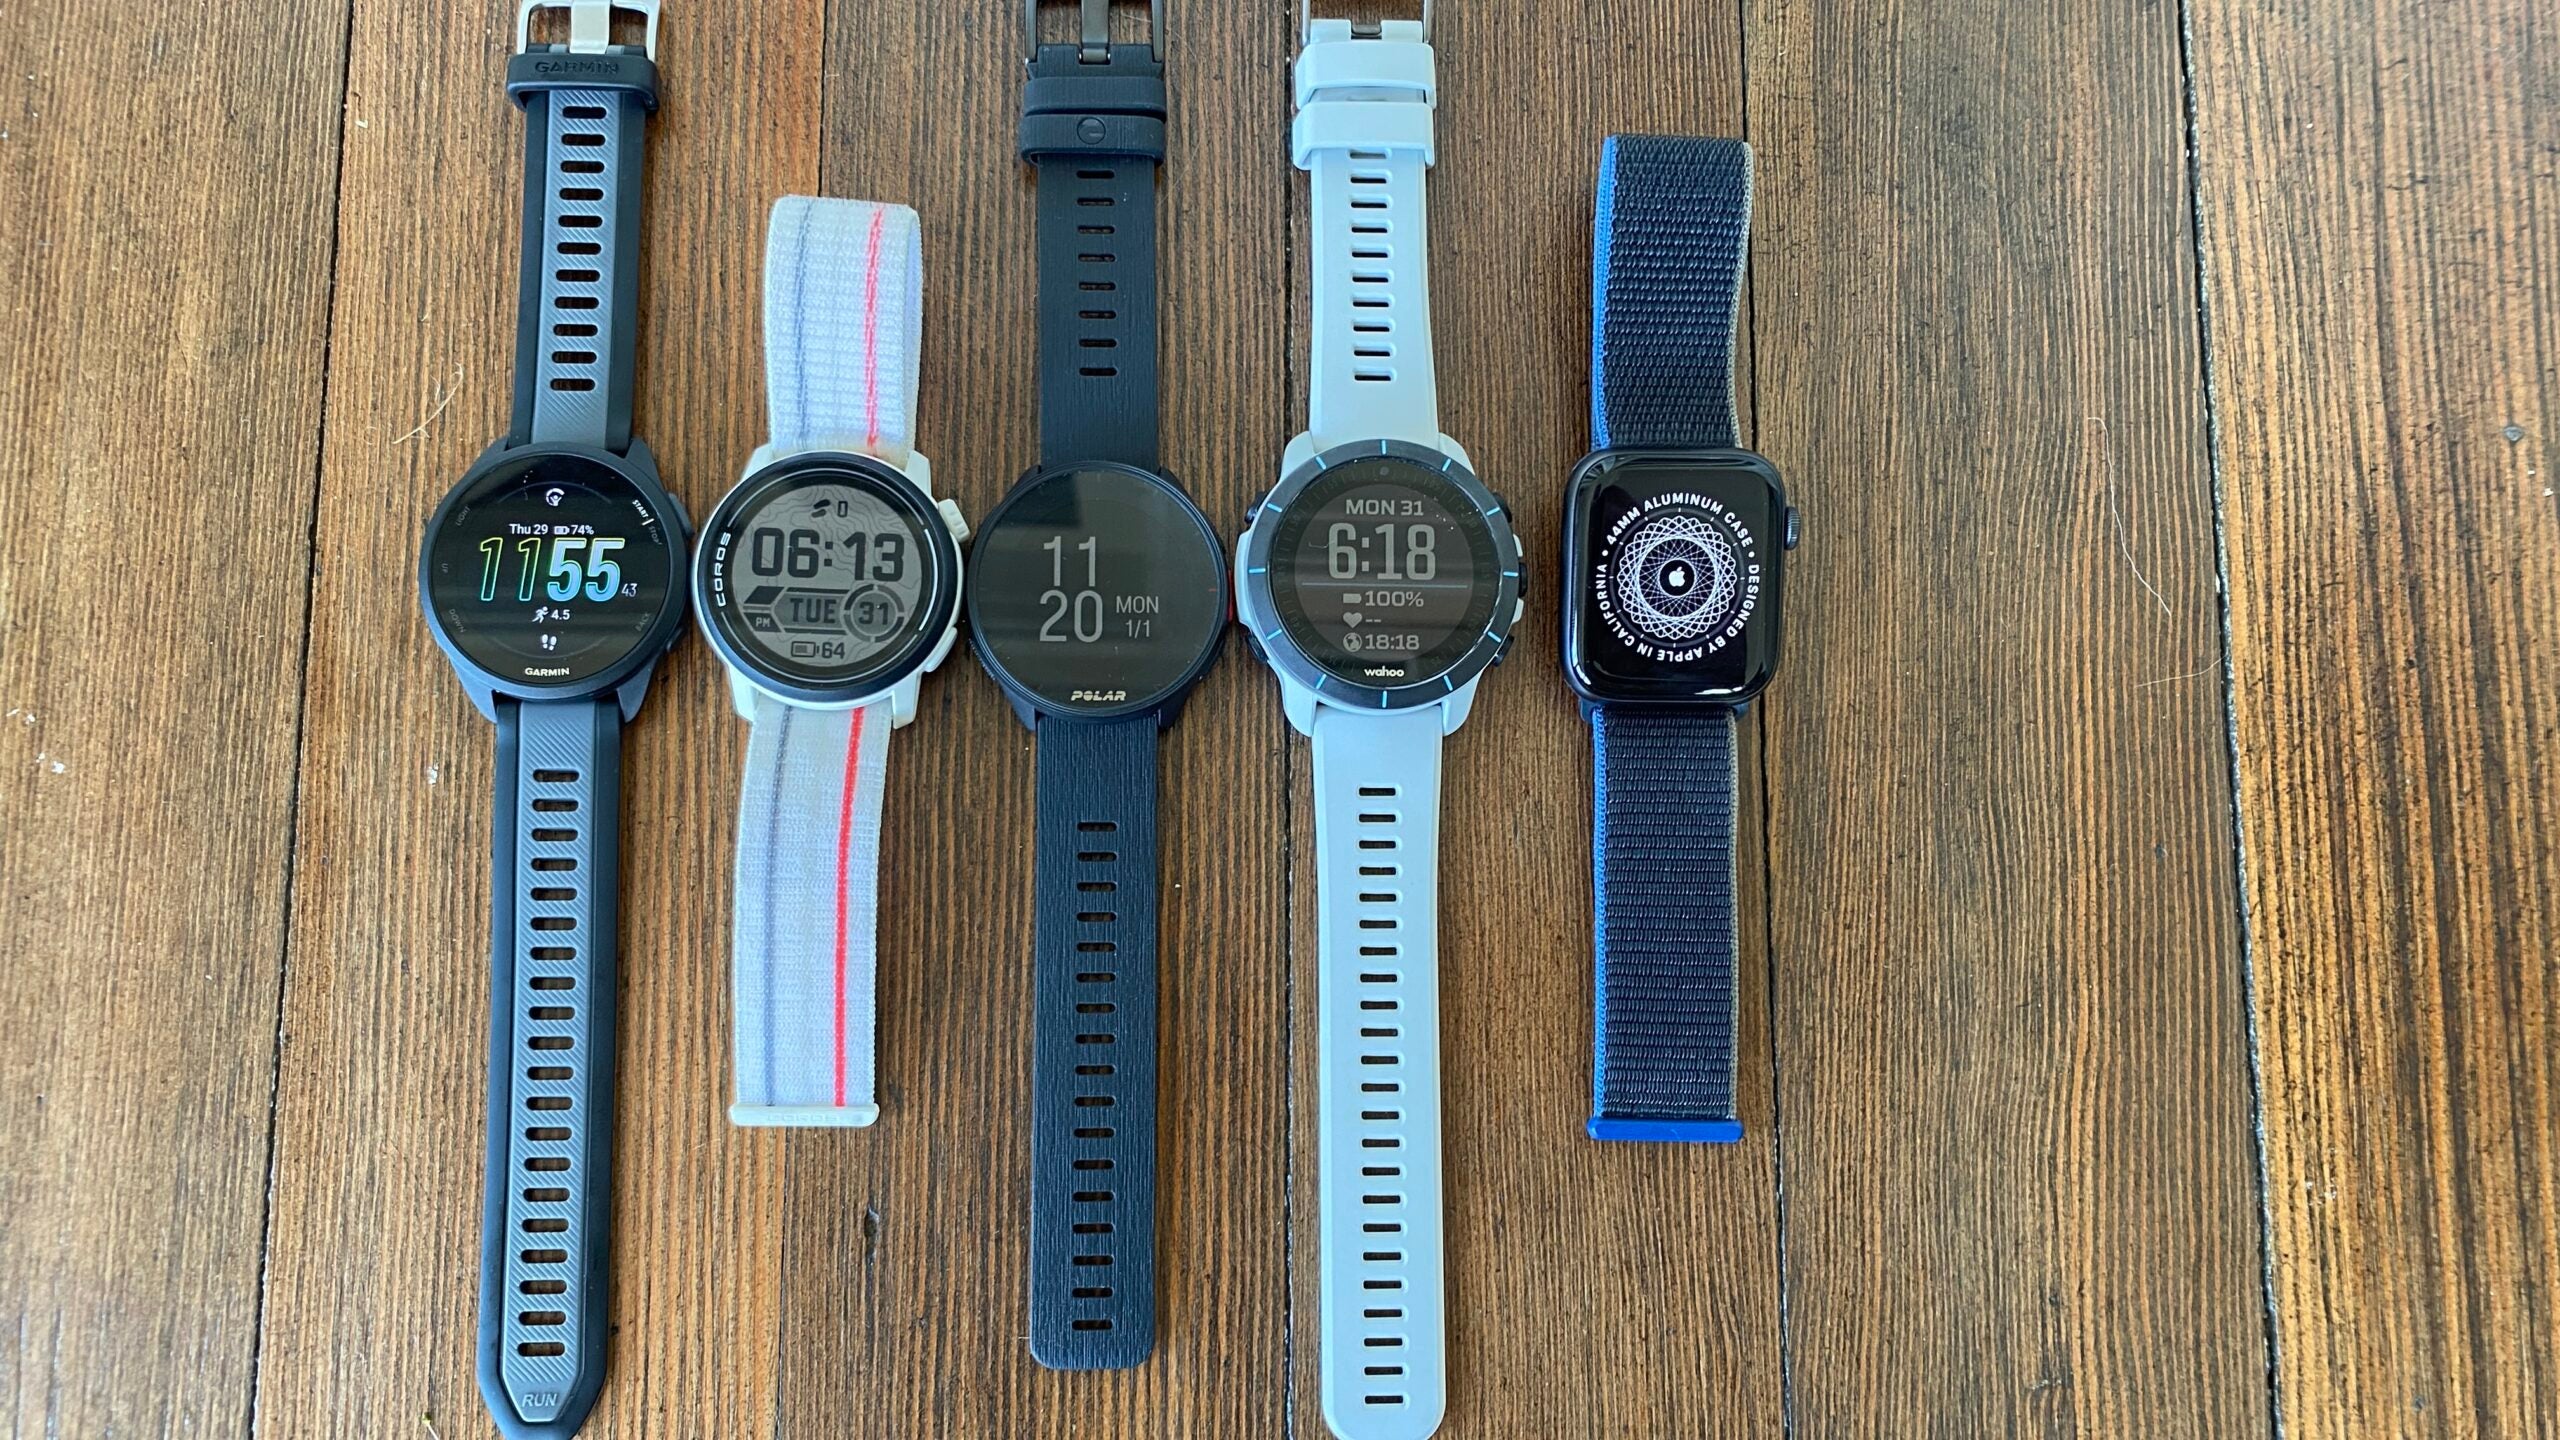 Here we see a side-by-side look at the Garmin Forerunner 165 next to the Coros Pace 3, Polar Pacer, Wahoo Rival, and Apple Watch SE.